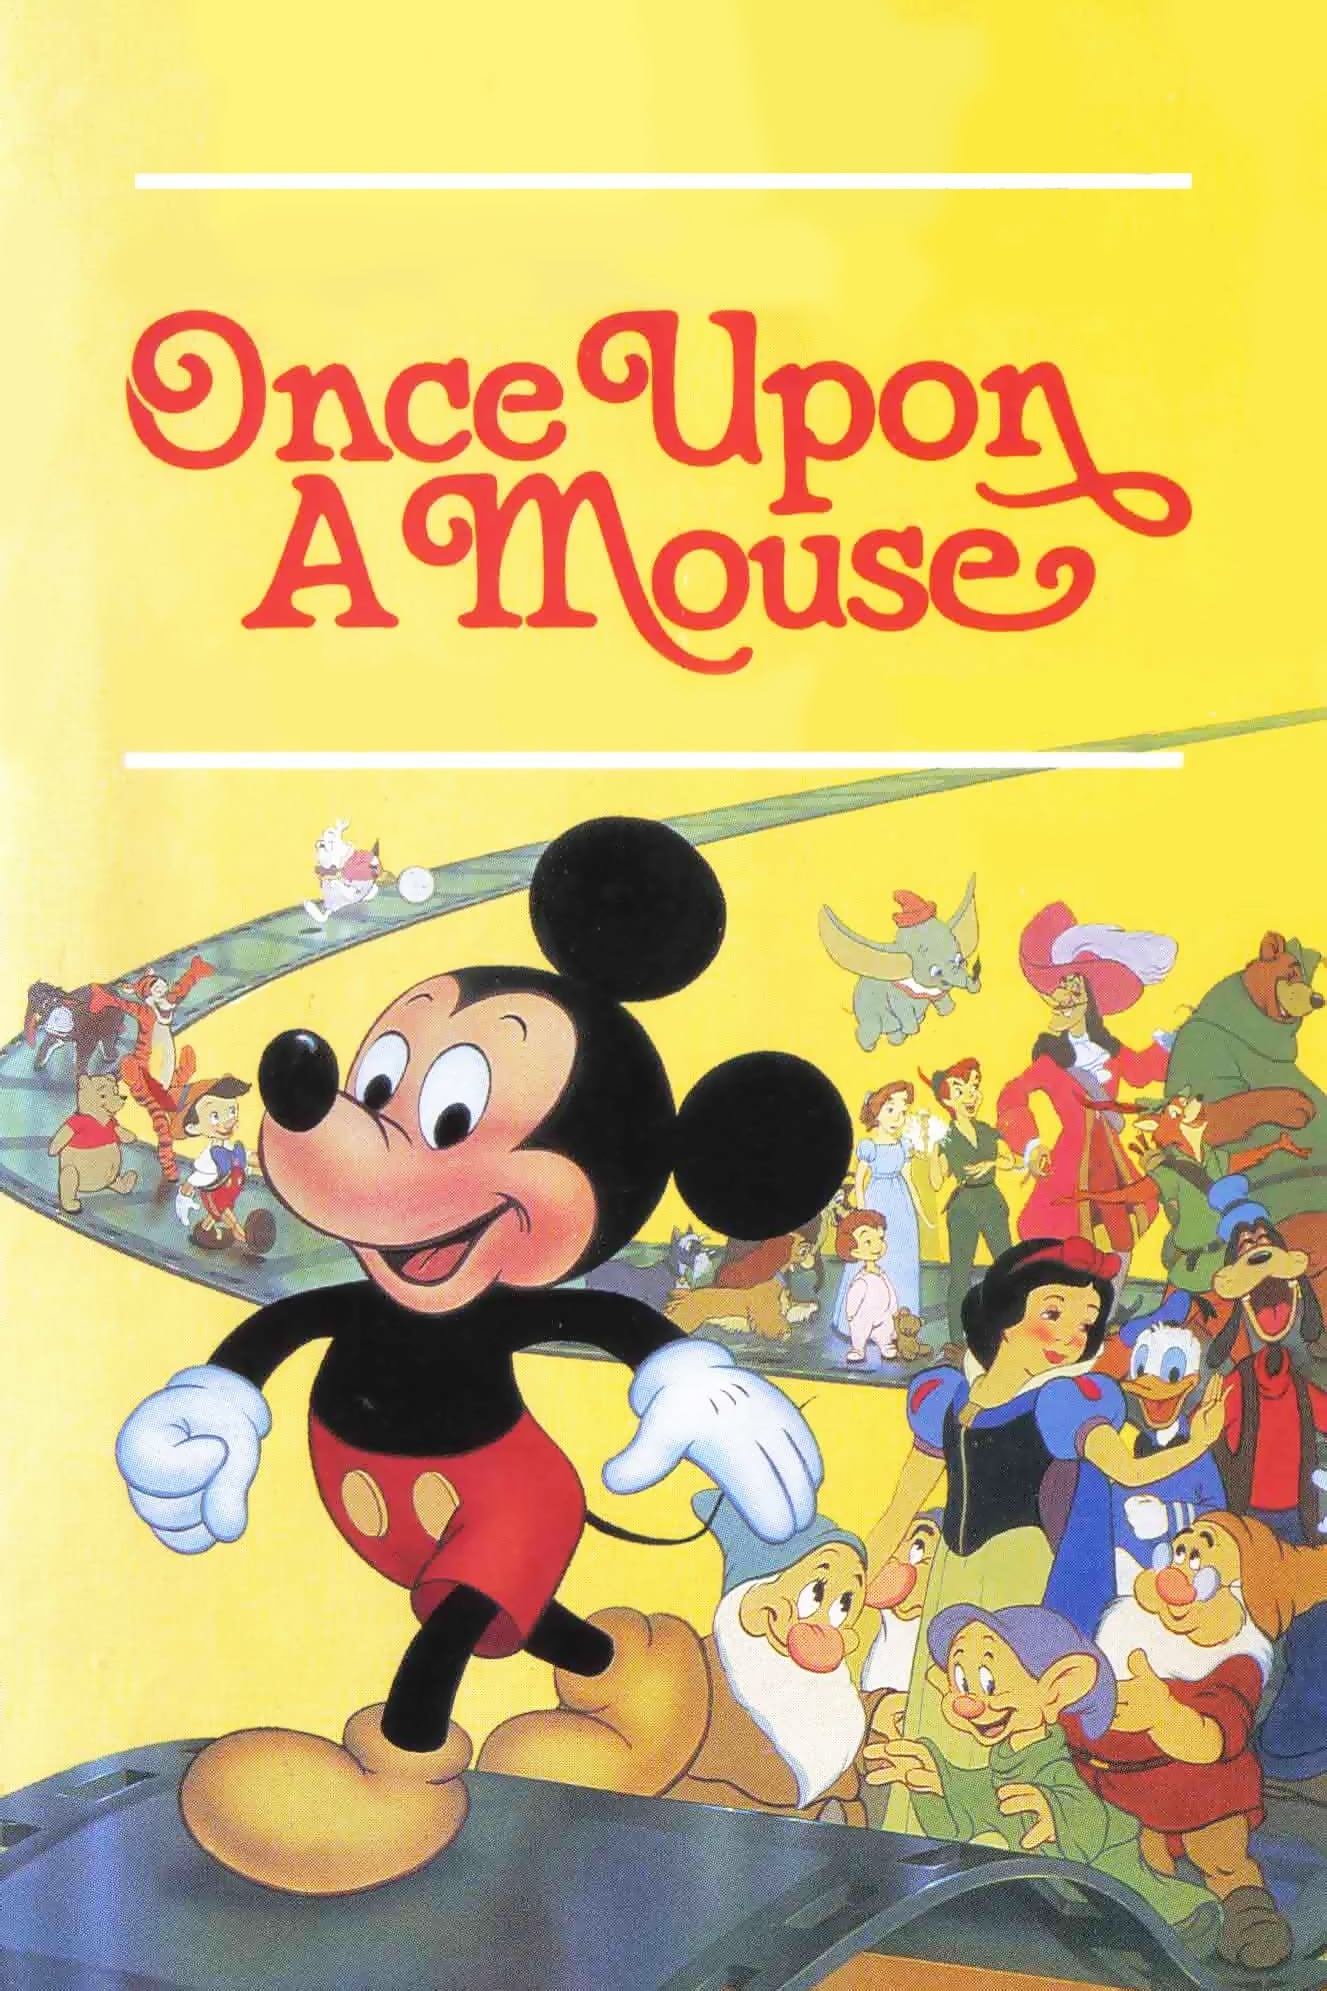 Once Upon a Mouse